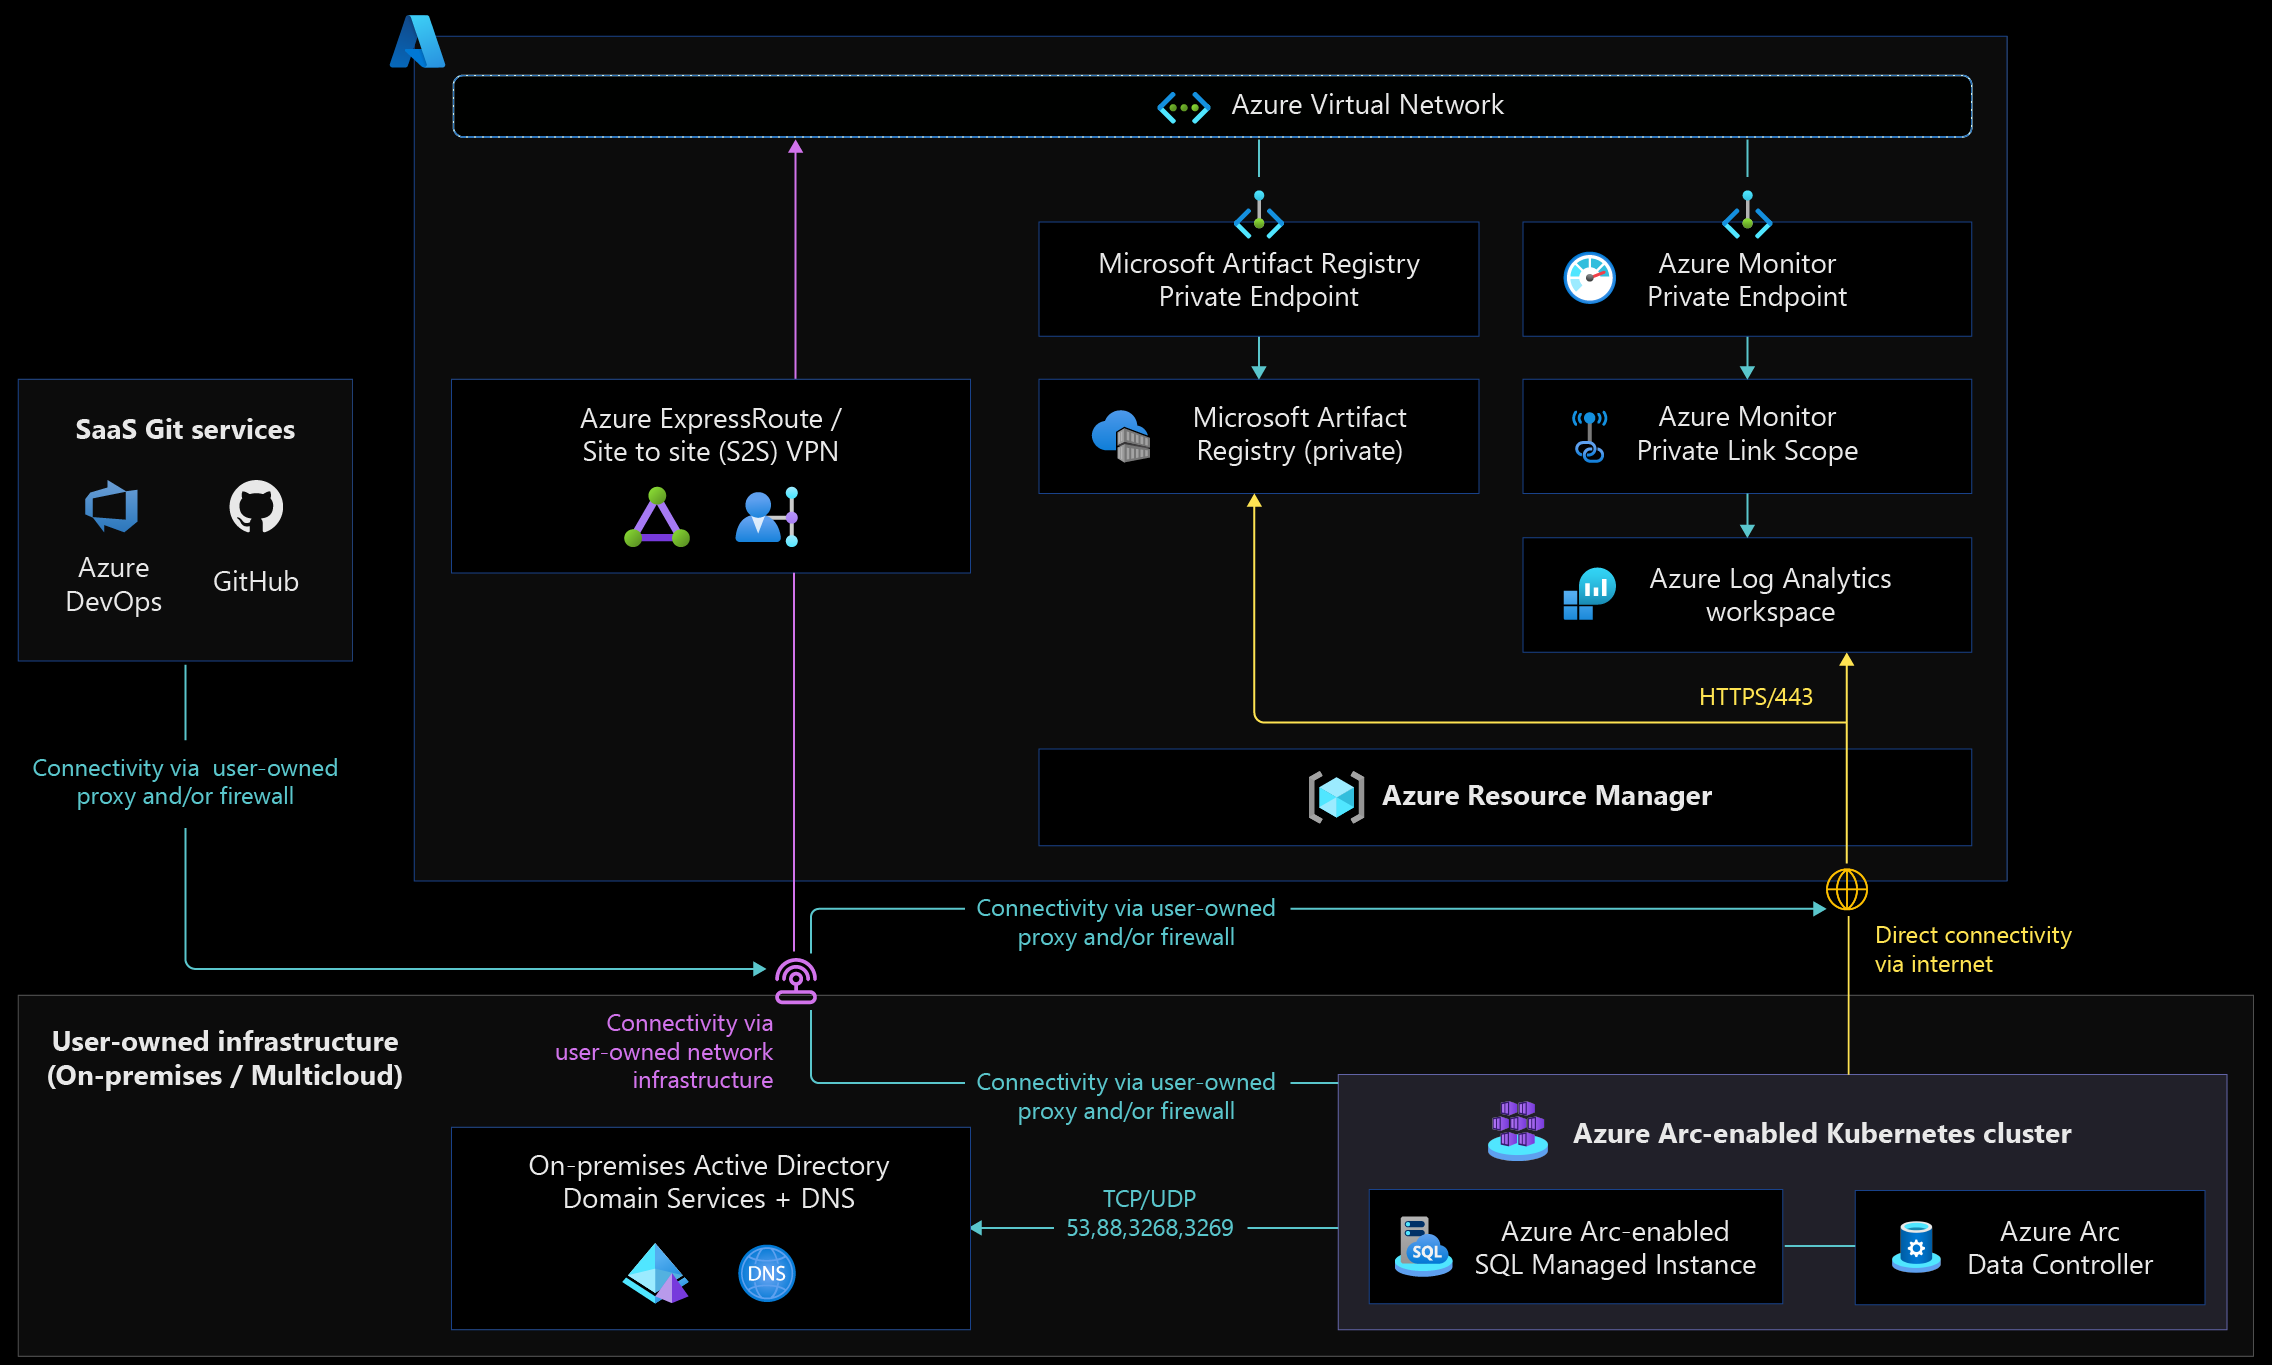 A diagram showing Azure Arc-enabled data services network architecture.